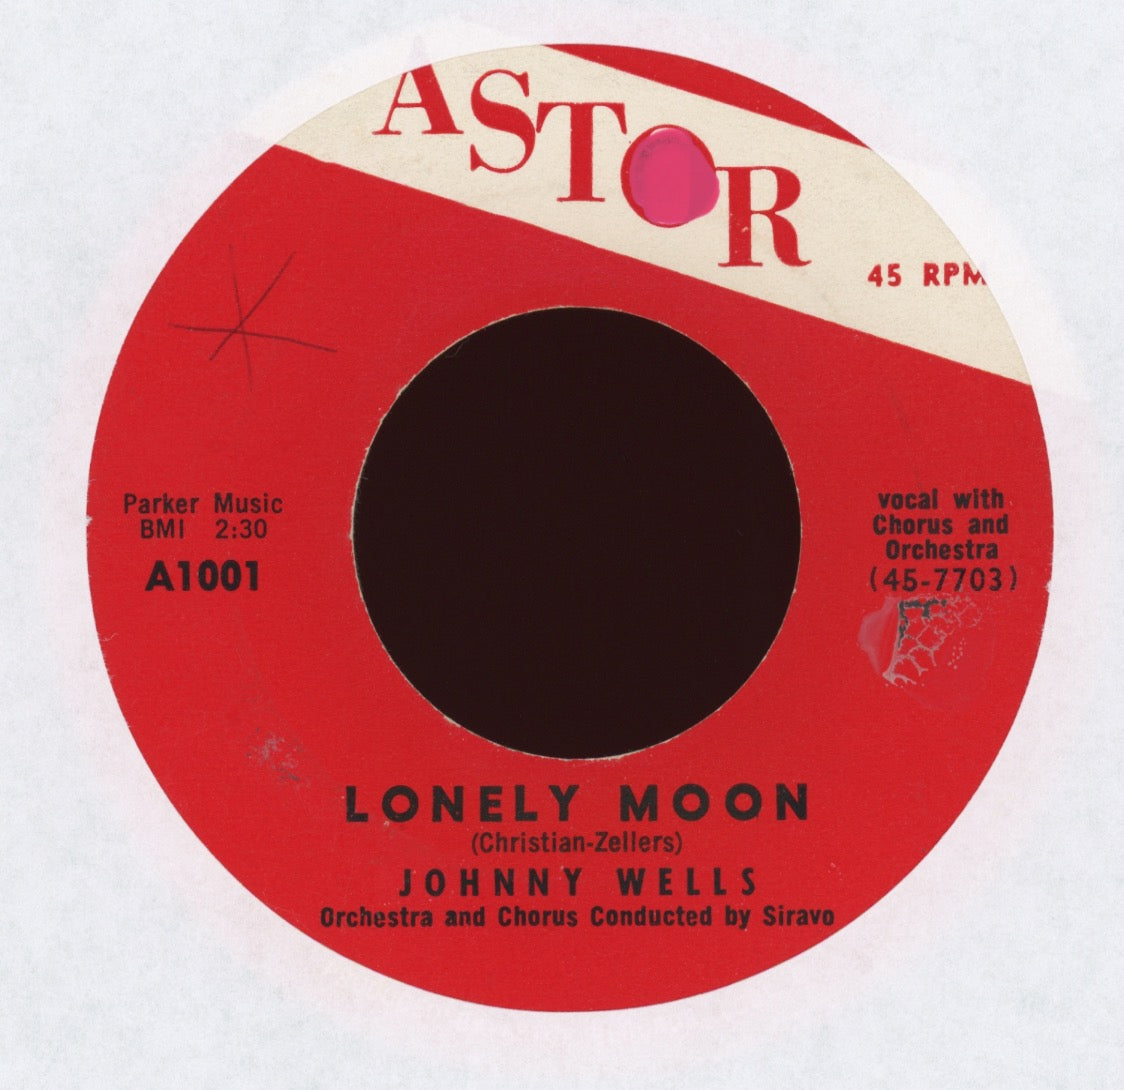 Johnny Wells - Lonely Moon on Astor